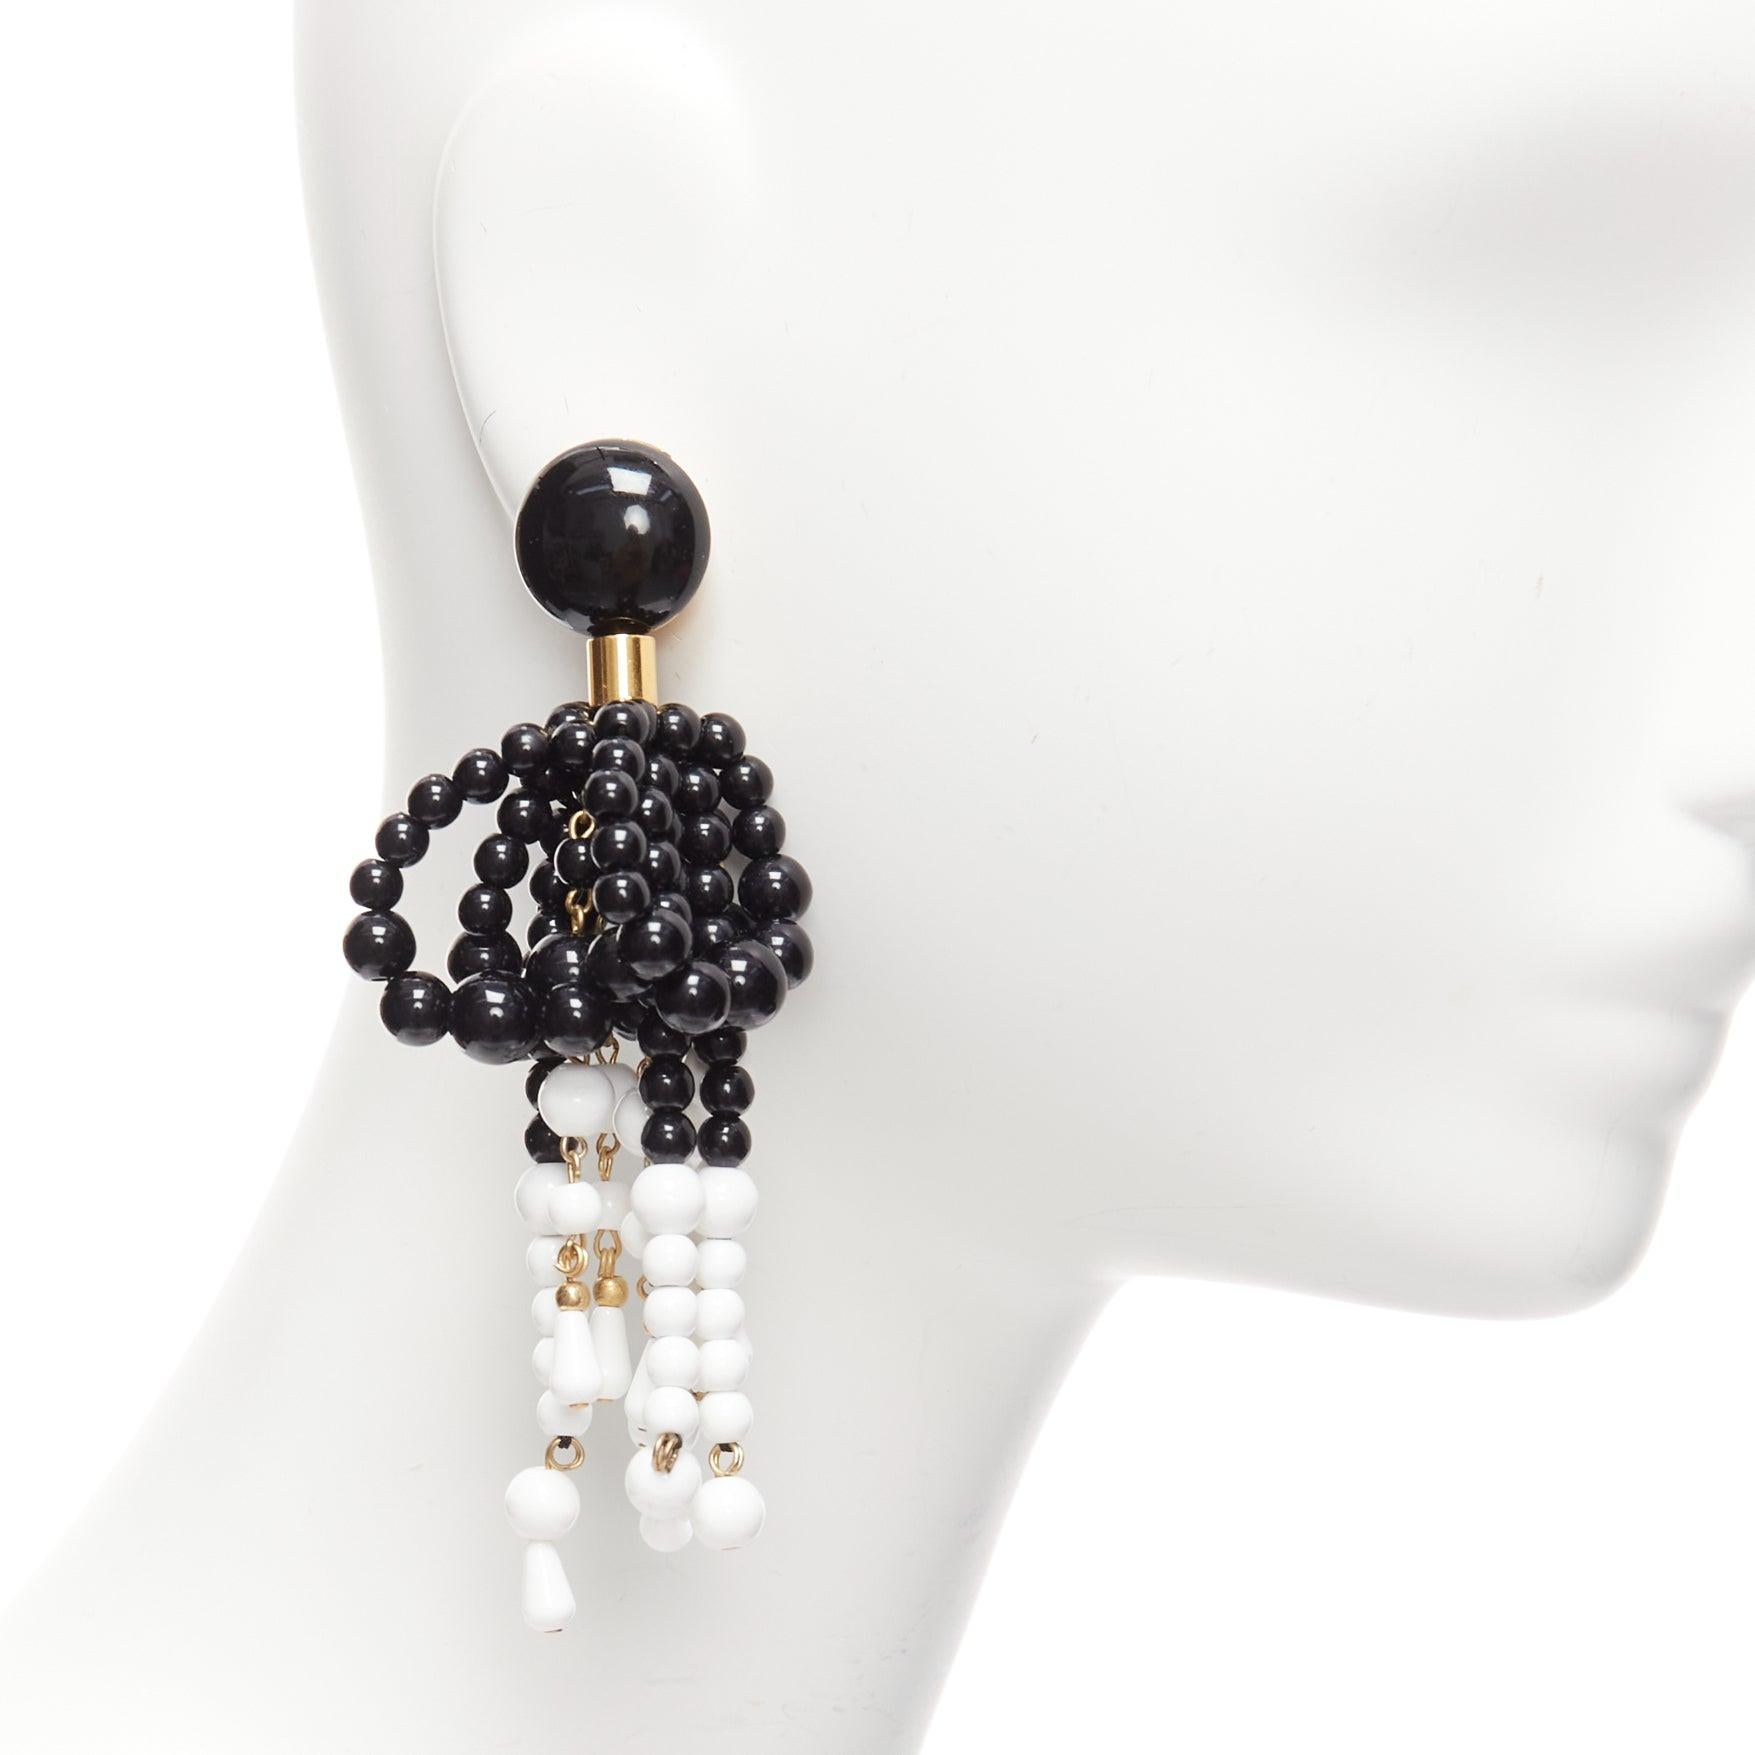 MARNI black white plastic beads drop tassel statement dangling clip on earrings pair
Reference: AAWC/A00911
Brand: Marni
Material: Acrylic, Metal
Color: Black, White
Pattern: Solid
Closure: Clip On
Lining: Gold Metal
Made in: